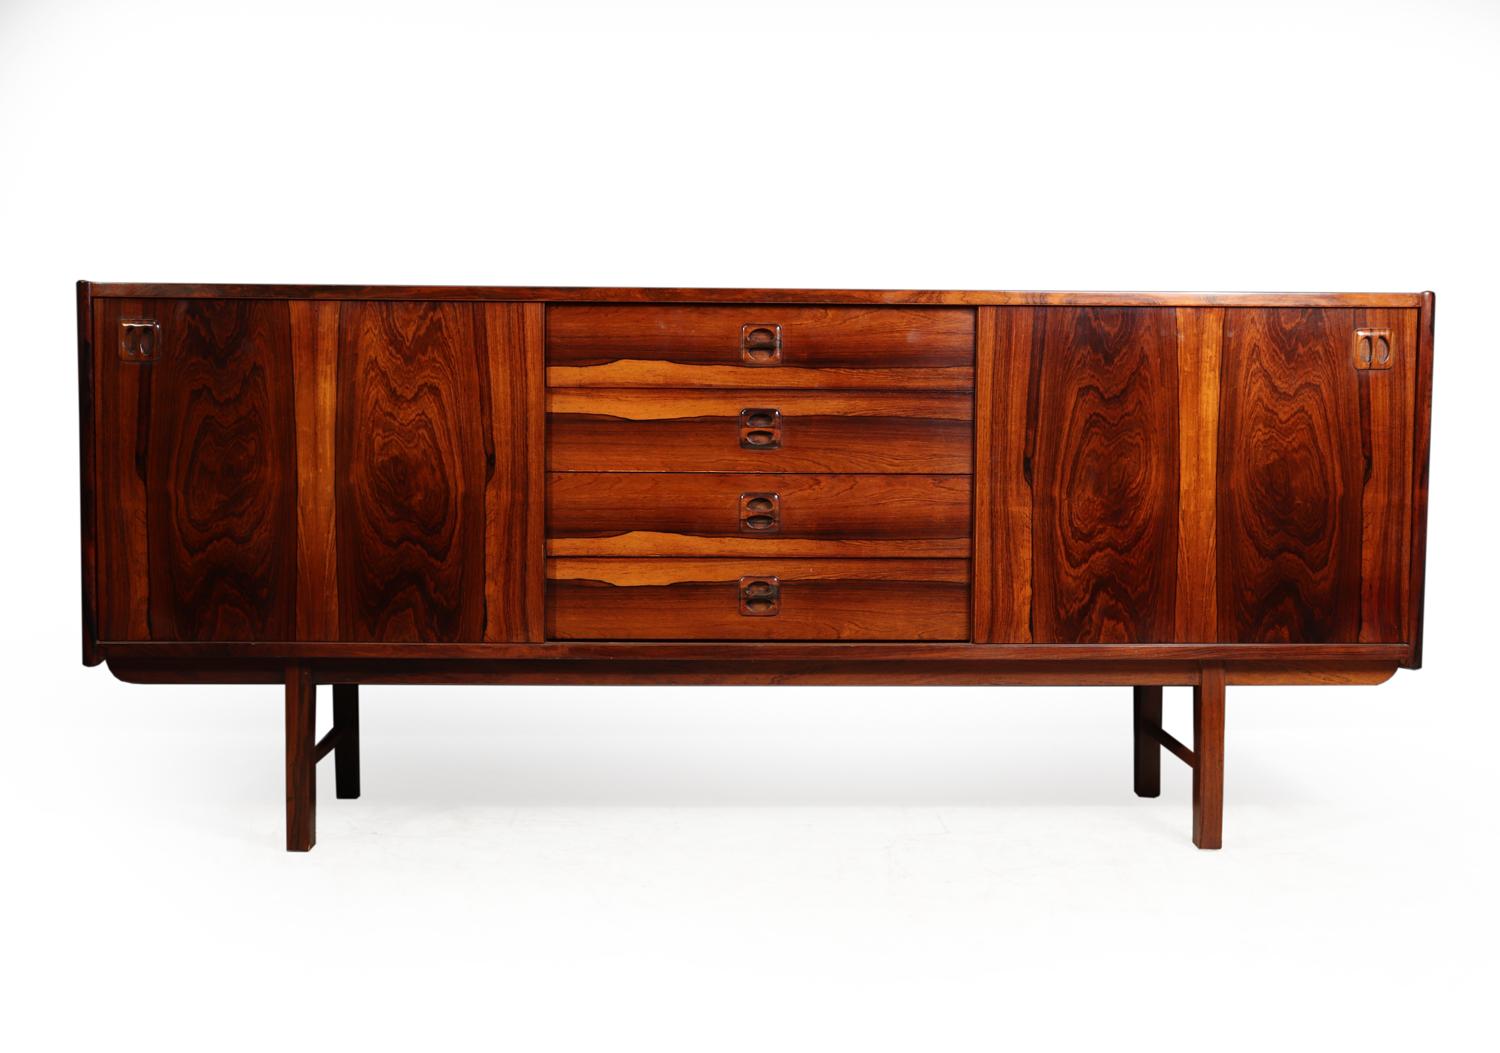 Midcentury sideboard in rosewood Denmark circa 1960
Original, midcentury, Danish, rosewood sideboard, from the 1960s with sculpted rosewood handles. Sideboard comprises of four central drawers and two sliding doors either end. All of the drawers